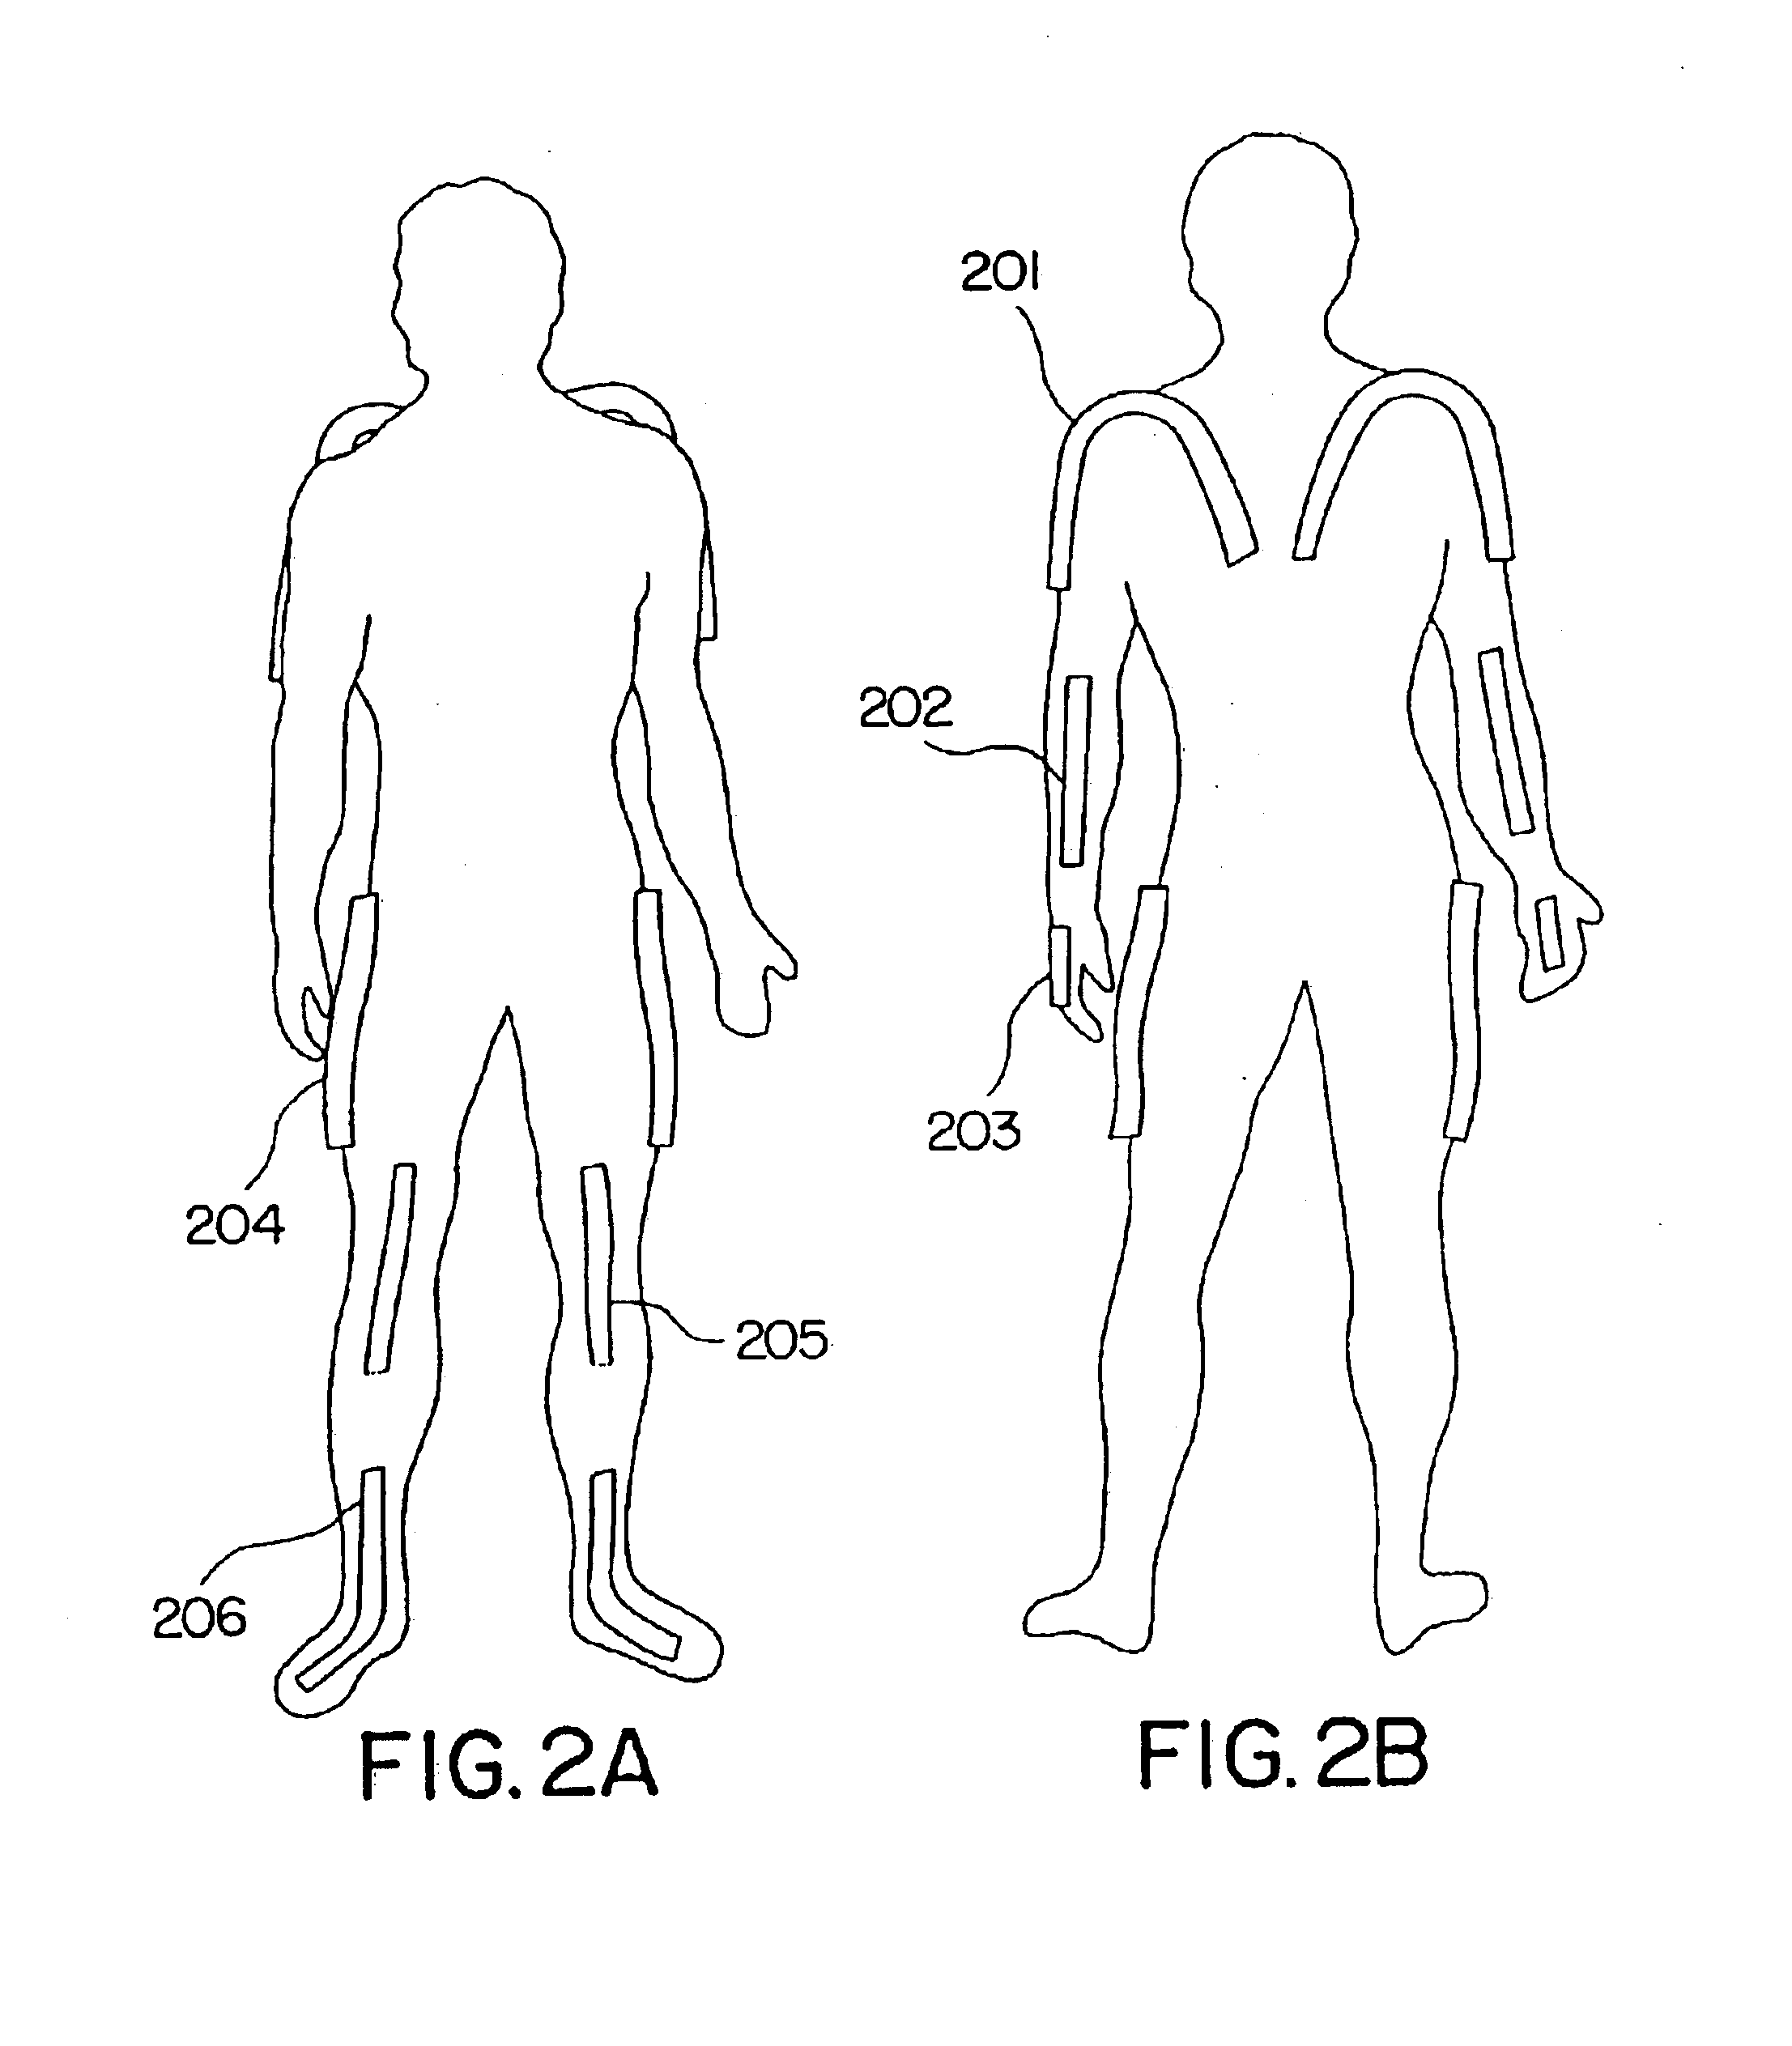 Goniometer-based body-tracking device